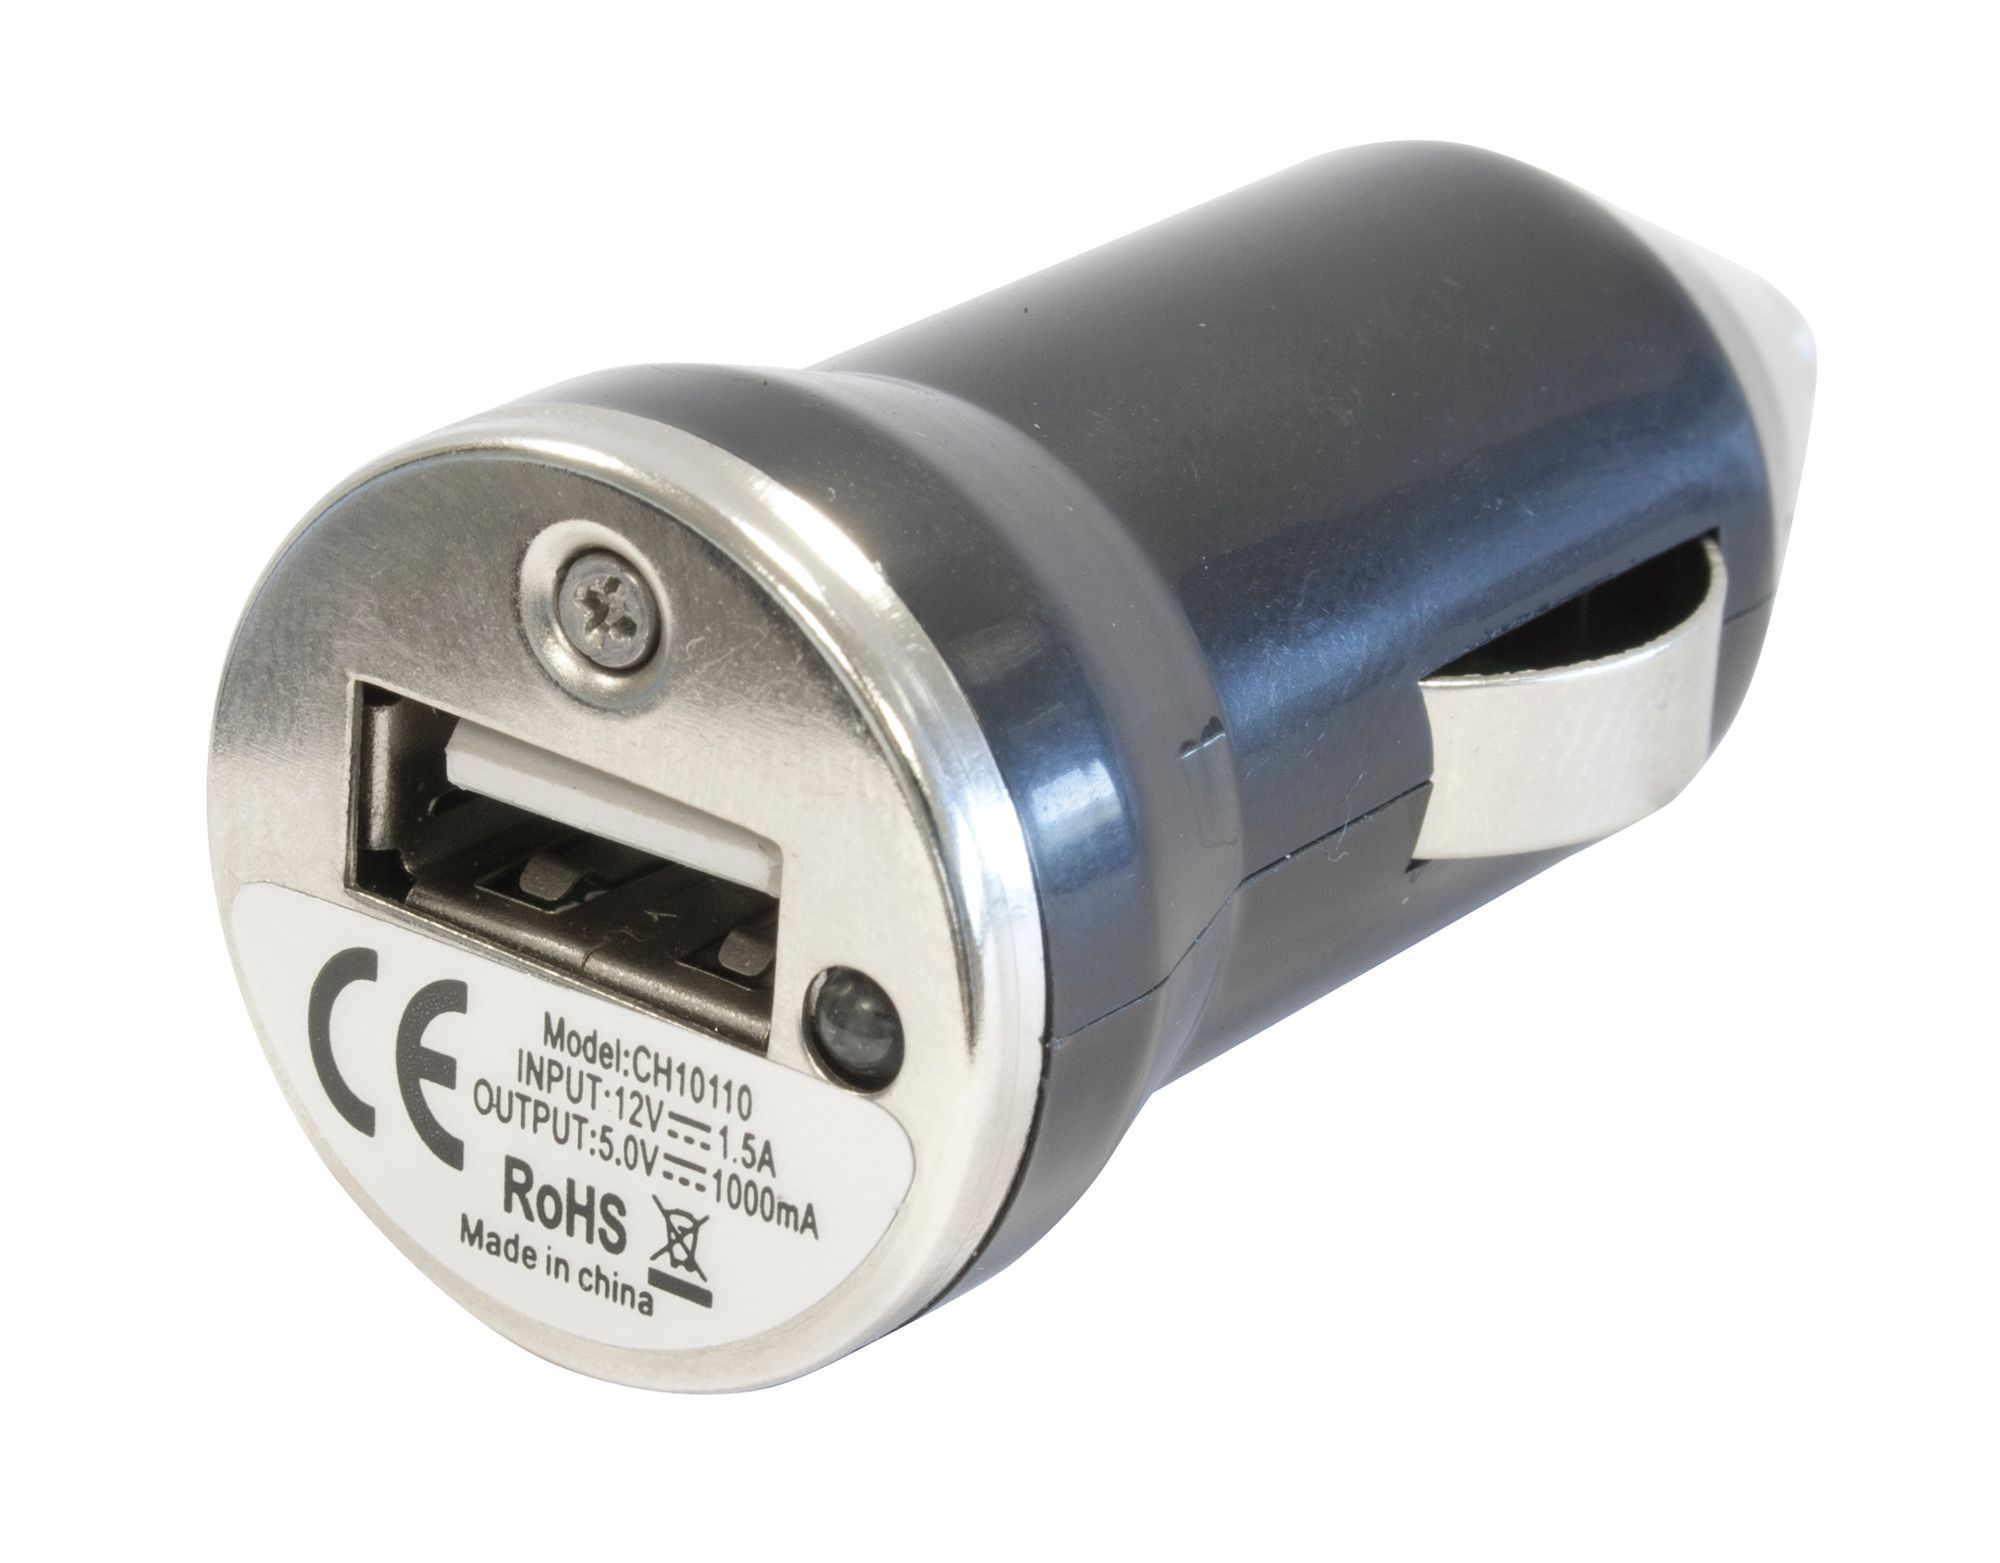 Diall Black & Silver 12V 1A In Car Single Usb Charger